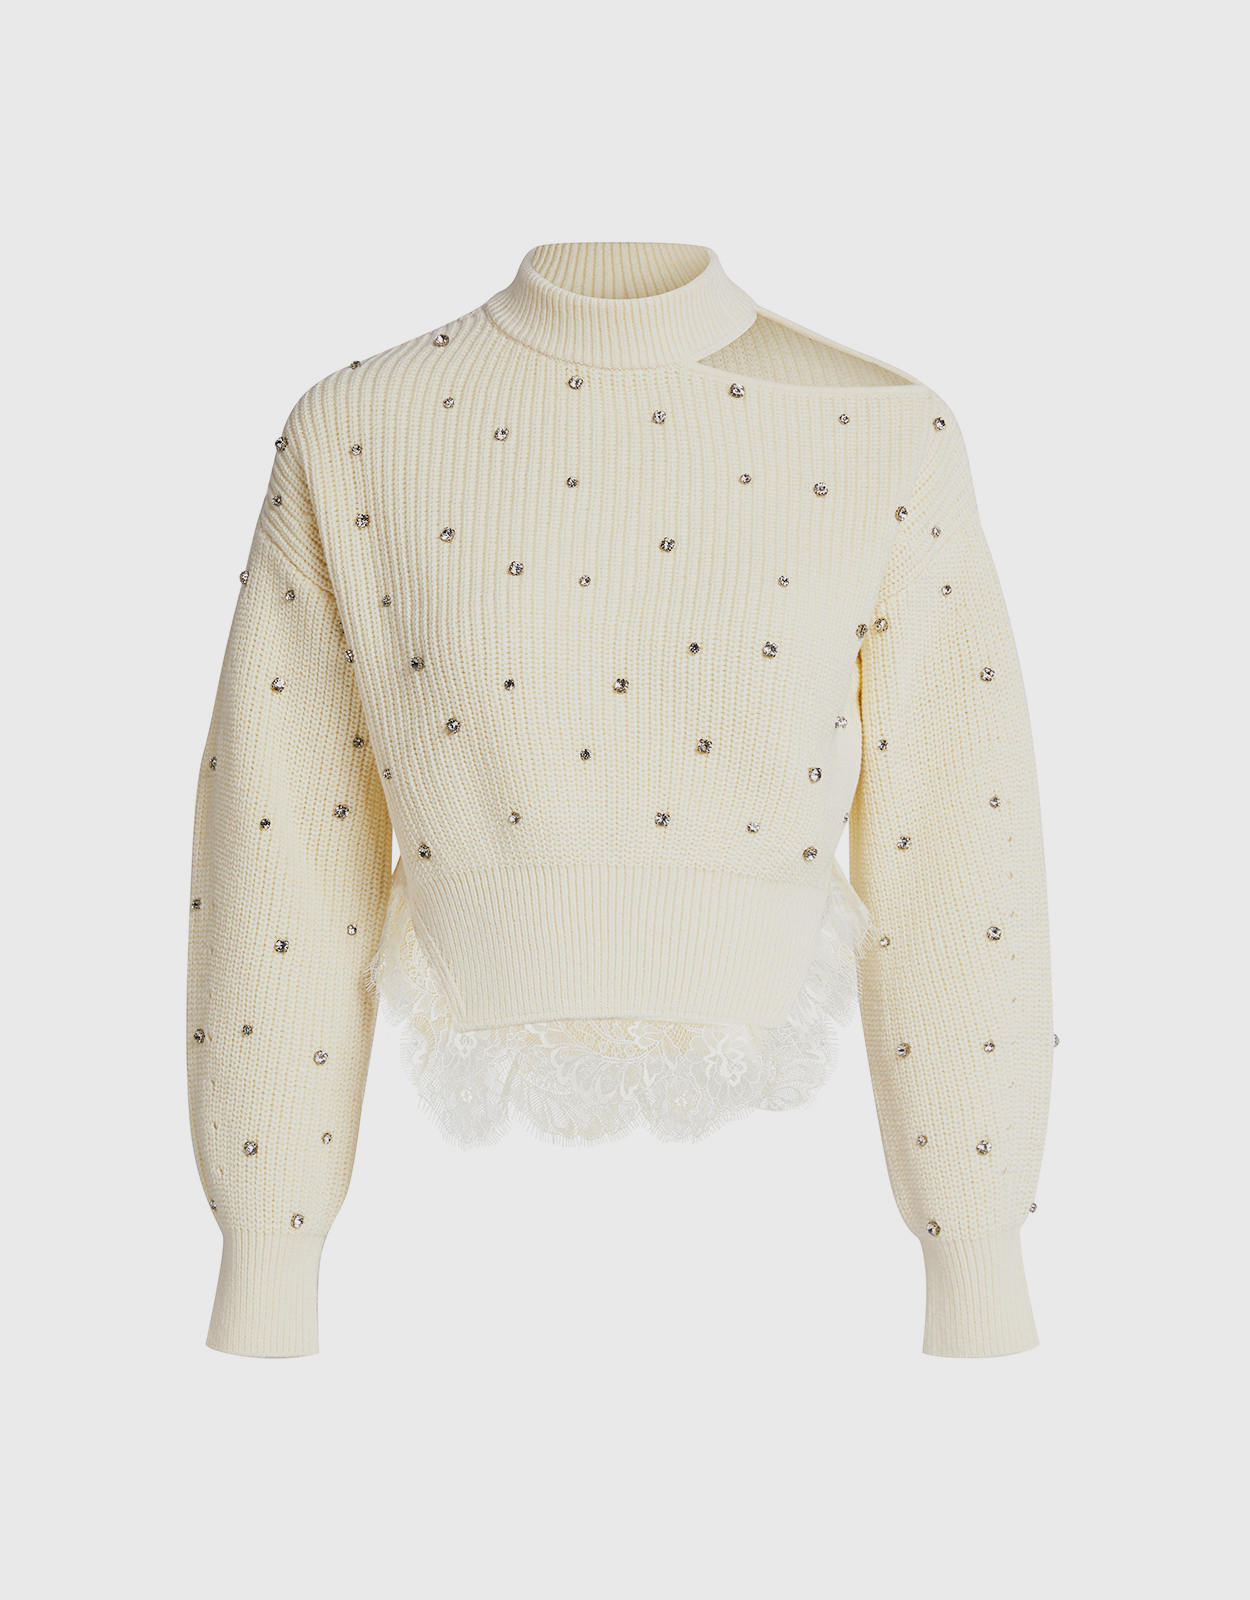 Self-Portrait Crystal Embellished Lace Paneled Sweater (Knitwear,Sweaters)  IFCHIC.COM